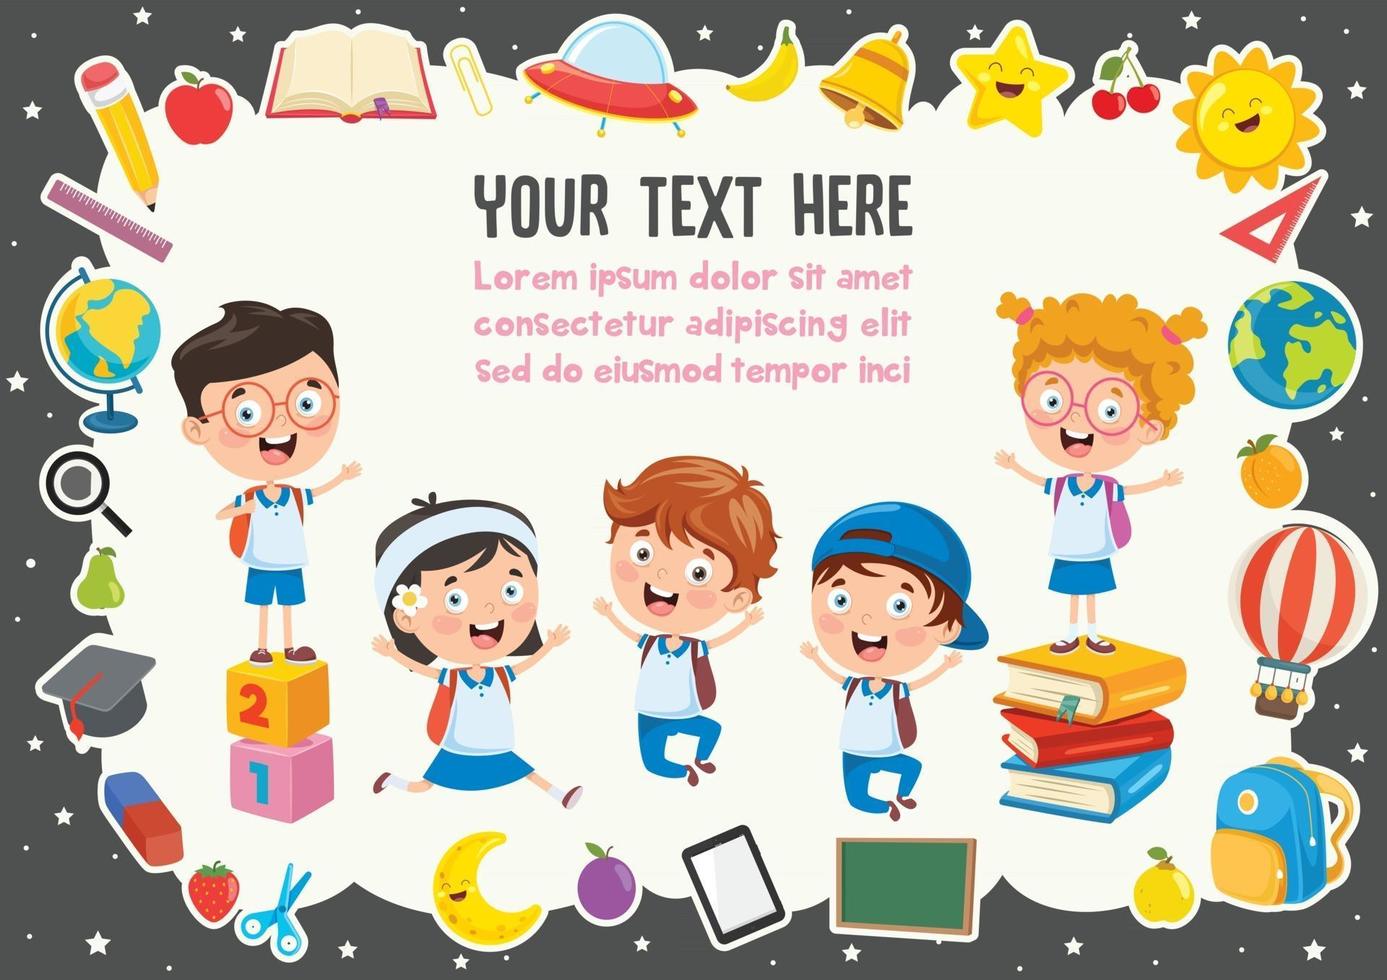 Colorful Template With Cute Children vector